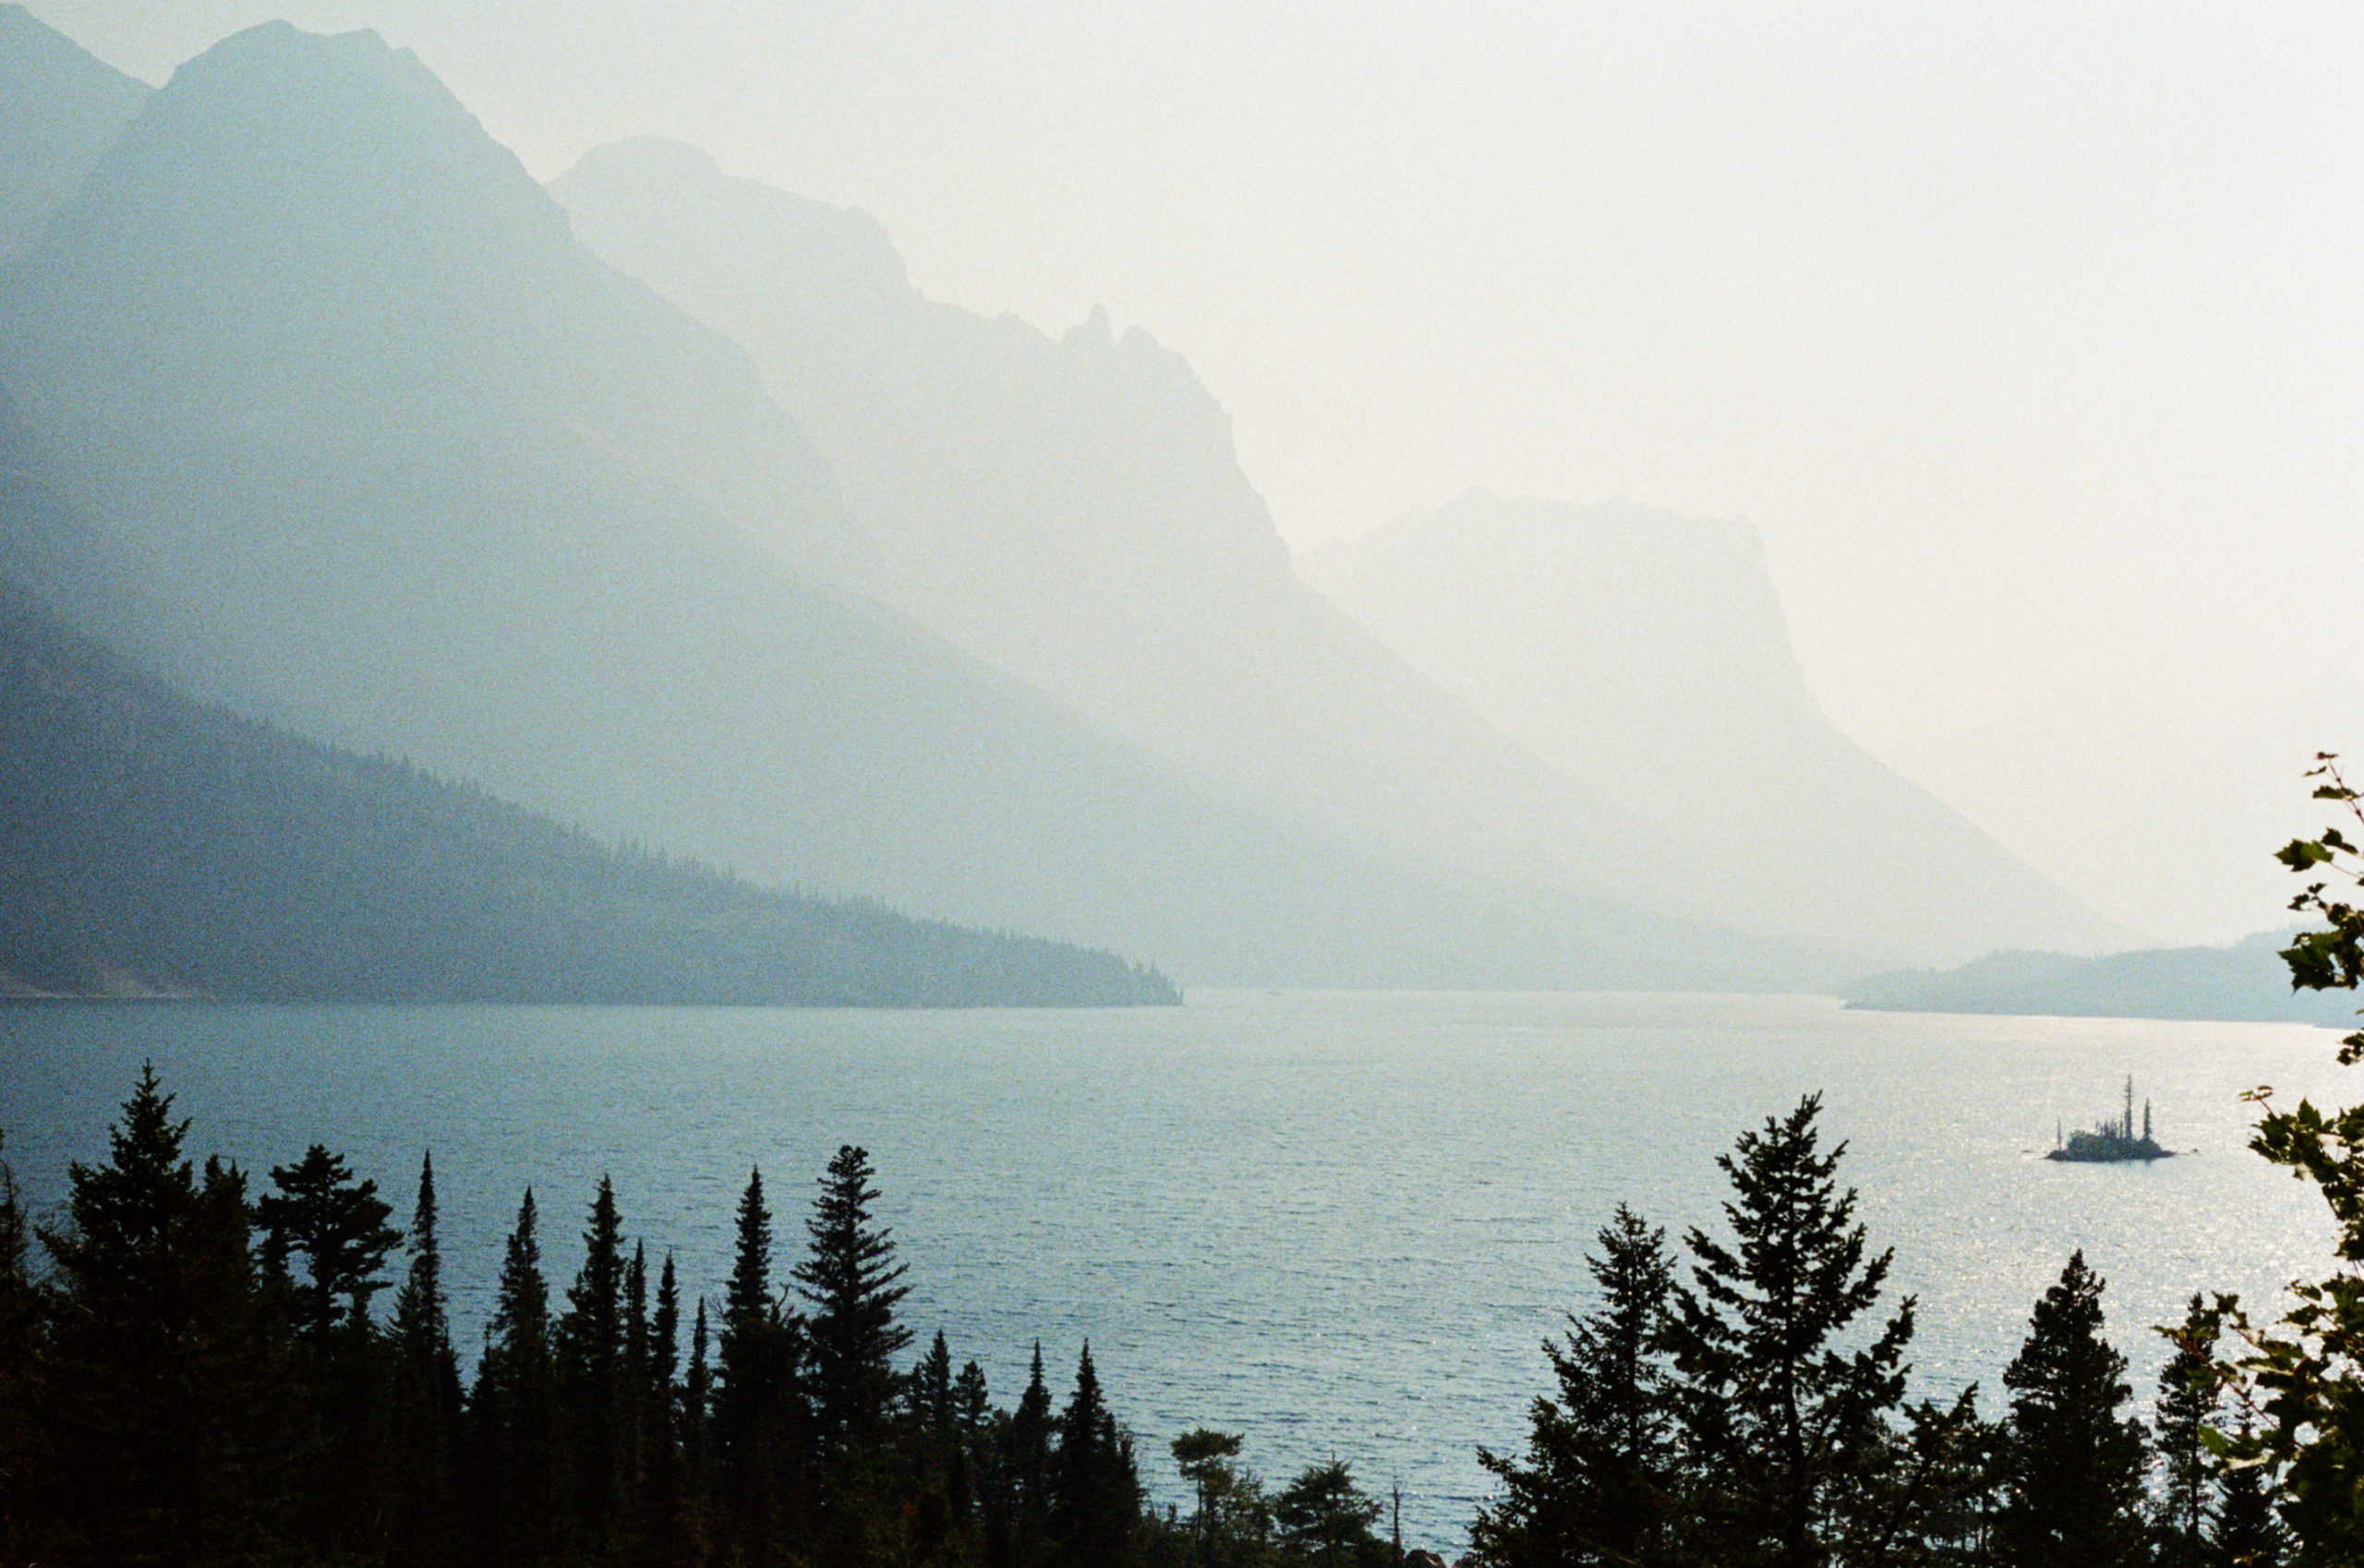 35mm film scan of St. Mary's Lake in Glacier National Park in Montana